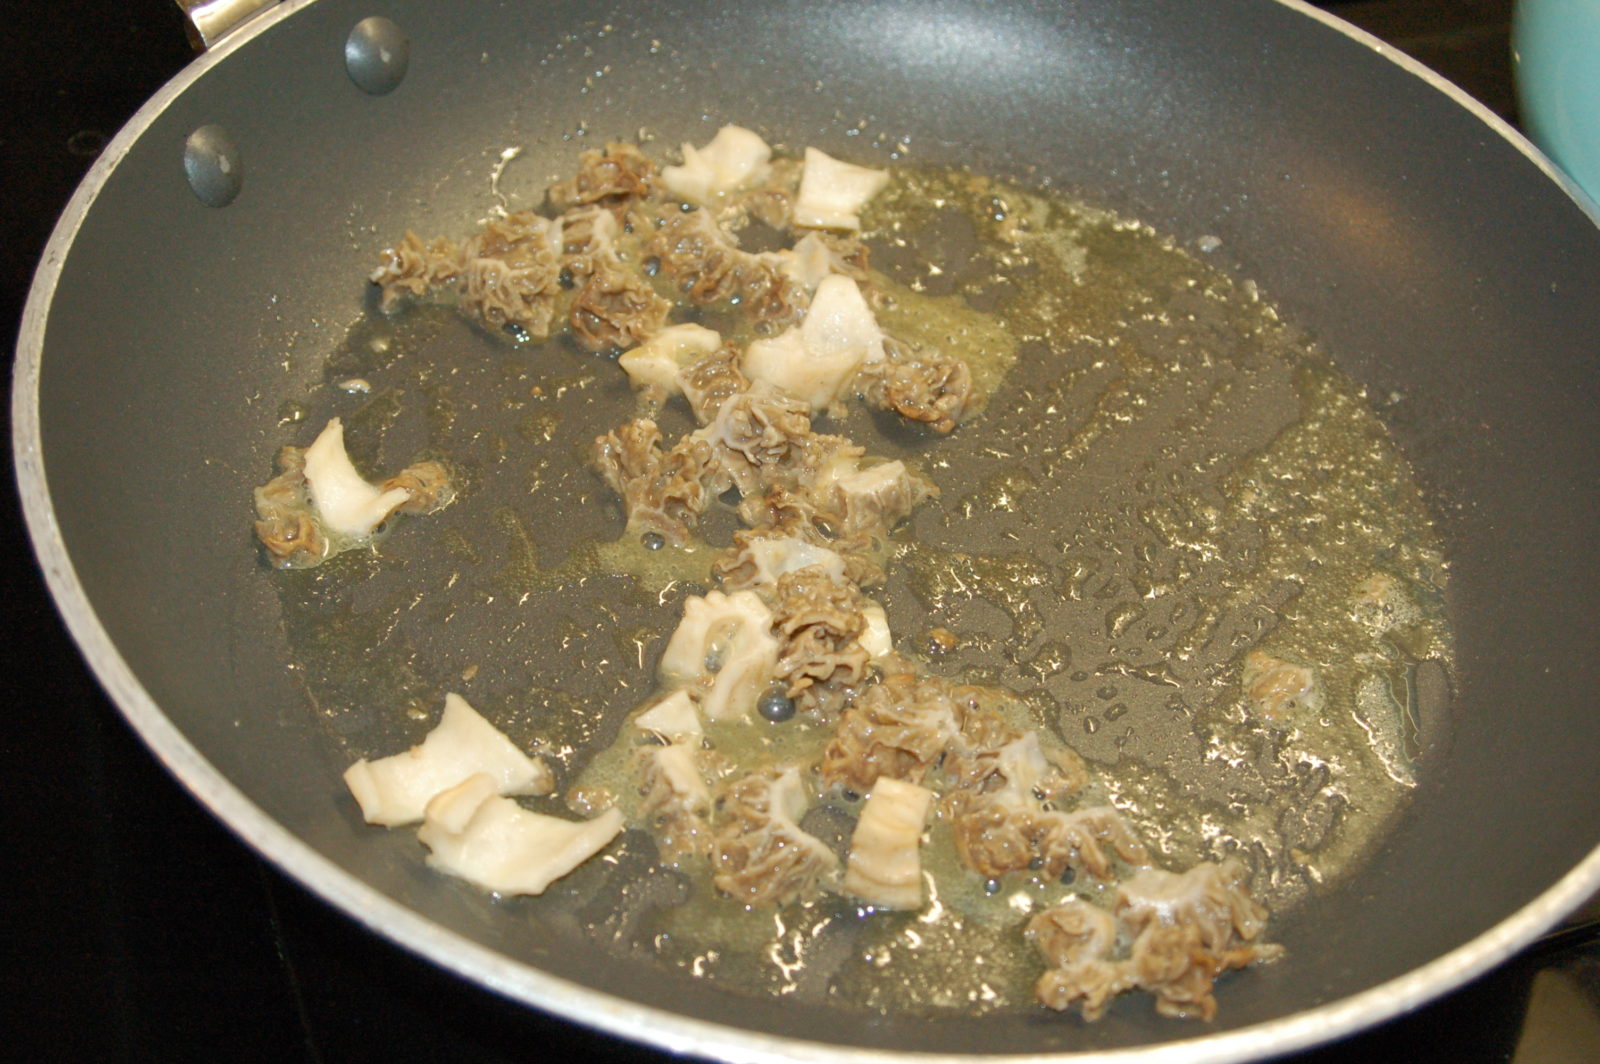 An image of cooking morels as a reminder that morel mushrooms should be cooked before consumption.